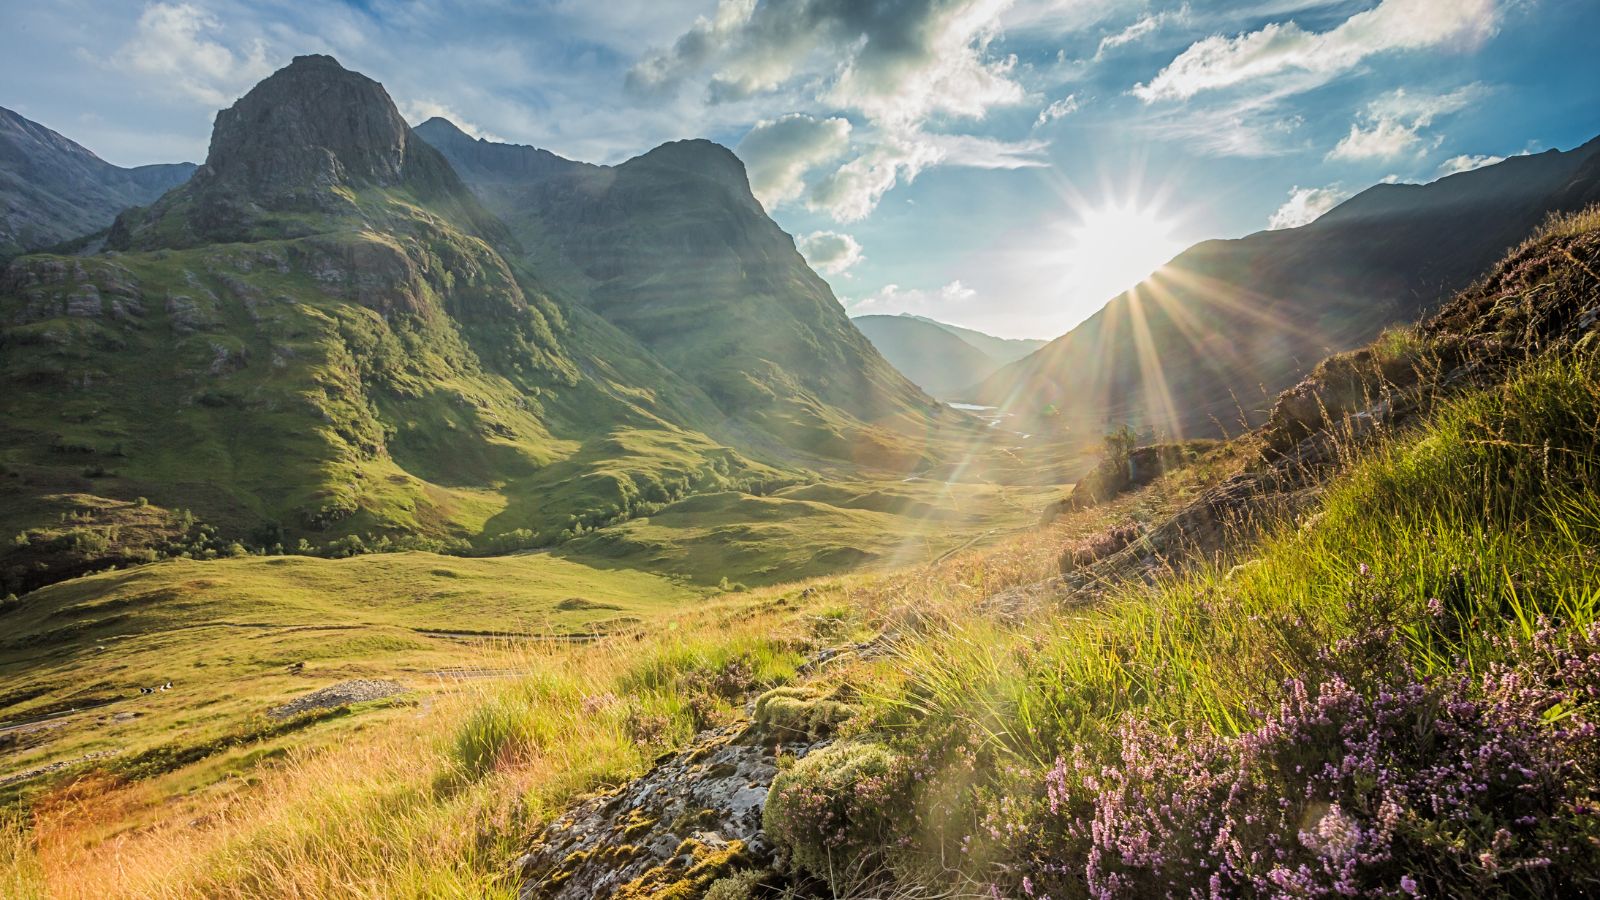 <p>The Scottish <em>highlands</em> are as famous as its <em>islands</em>. <a href="https://www.highlandtitles.com/visit-the-highlands/#:~:text=Geographically%2C%20the%20Highlands%20refer%20to,Glasgow%2C%20to%20Stonehaven%20near%20Aberdeen." rel="noreferrer noopener">According to Highland Titles</a>, with a few exceptions, this part of the country refers “to the area north and west of the Highland Boundary Fault, which crosses mainland Scotland almost in a straight line from Helensburgh north-west of Glasgow, to Stonehaven near Aberdeen.”</p><p>This is quintessential Scotland in my mind – rugged and remote. It’s the sort of place that breeds tough people. It’s just you and nature. Hills, mountains, lochs, and beaches make it a haven for outdoor enthusiasts.</p><p>One highland destination that deserves special mention is Glencoe. It’s a magical place with incredible mountain views and natural attractions.</p>